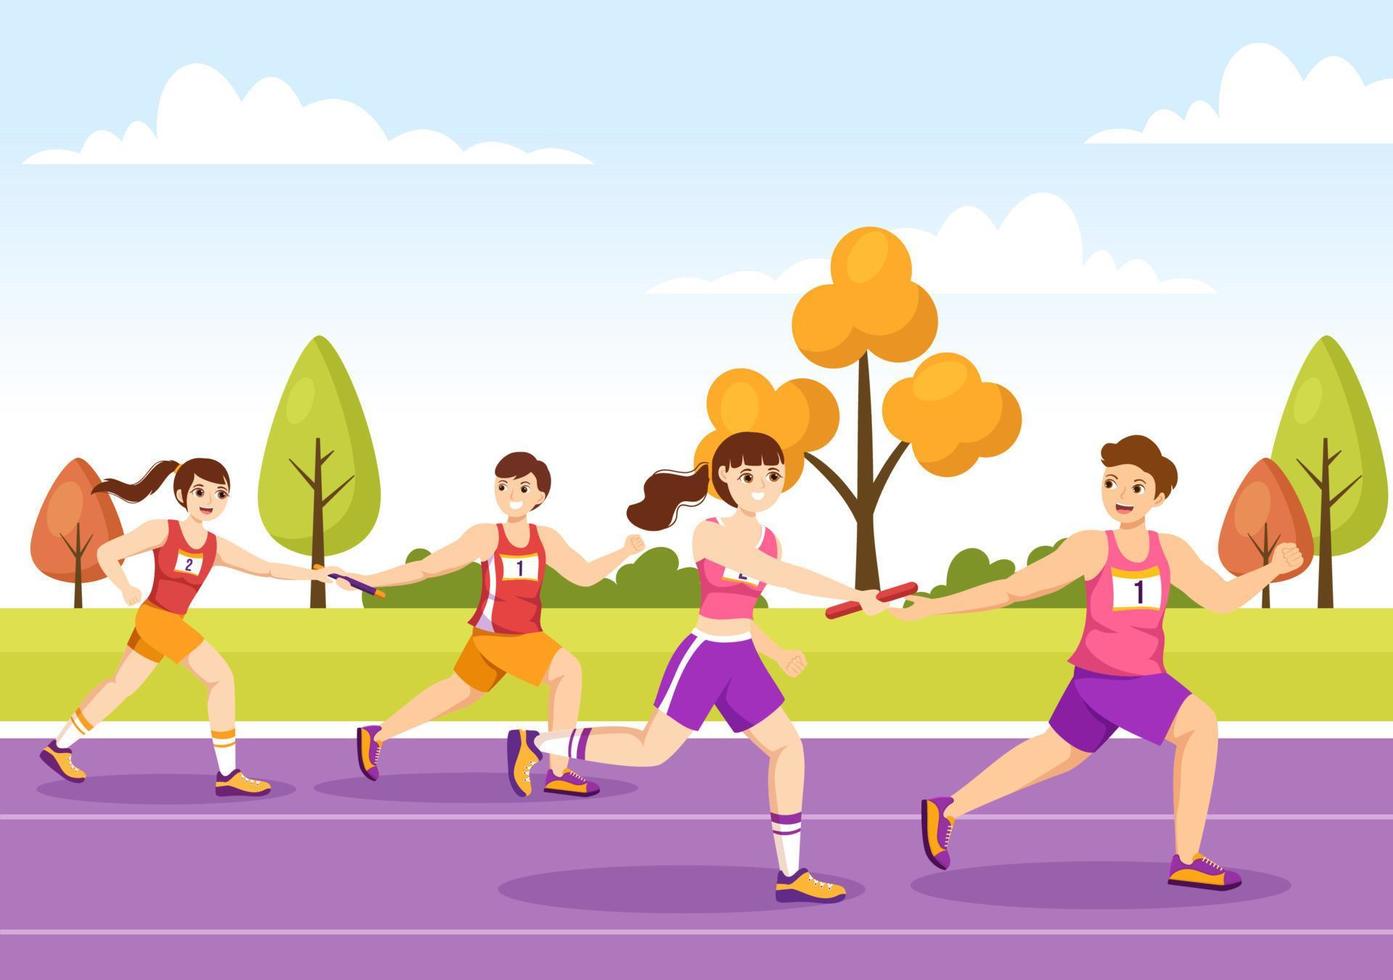 Relay Race Illustration by Passing the Baton to Teammates Until Reaching the Finish Line in a Sports Championship Flat Cartoon Hand Drawing Template vector